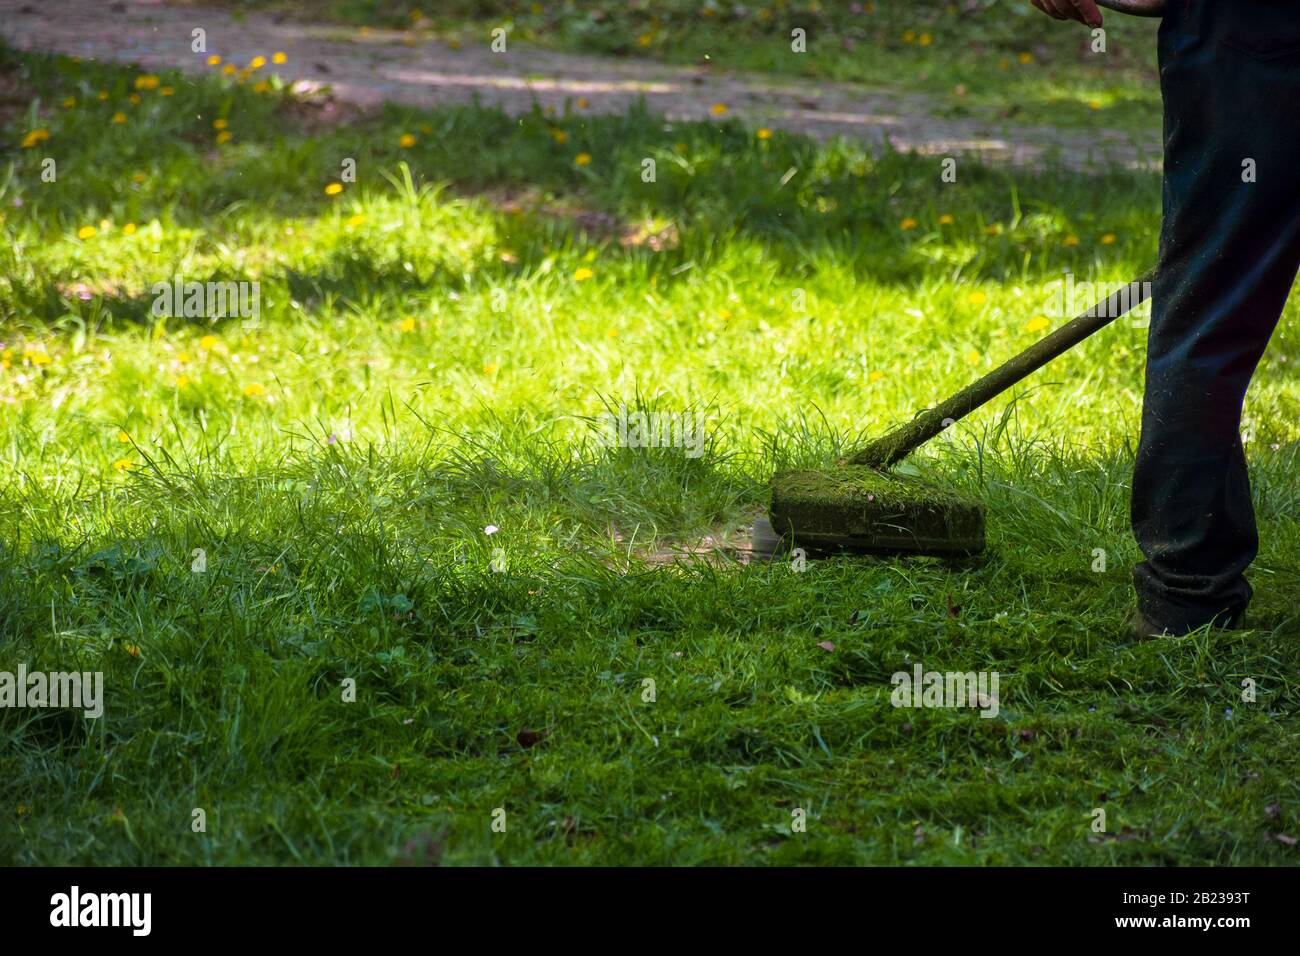 grass trimming work in the park. professional lawn care service using gasoline trimmer in shade of the trees Stock Photo